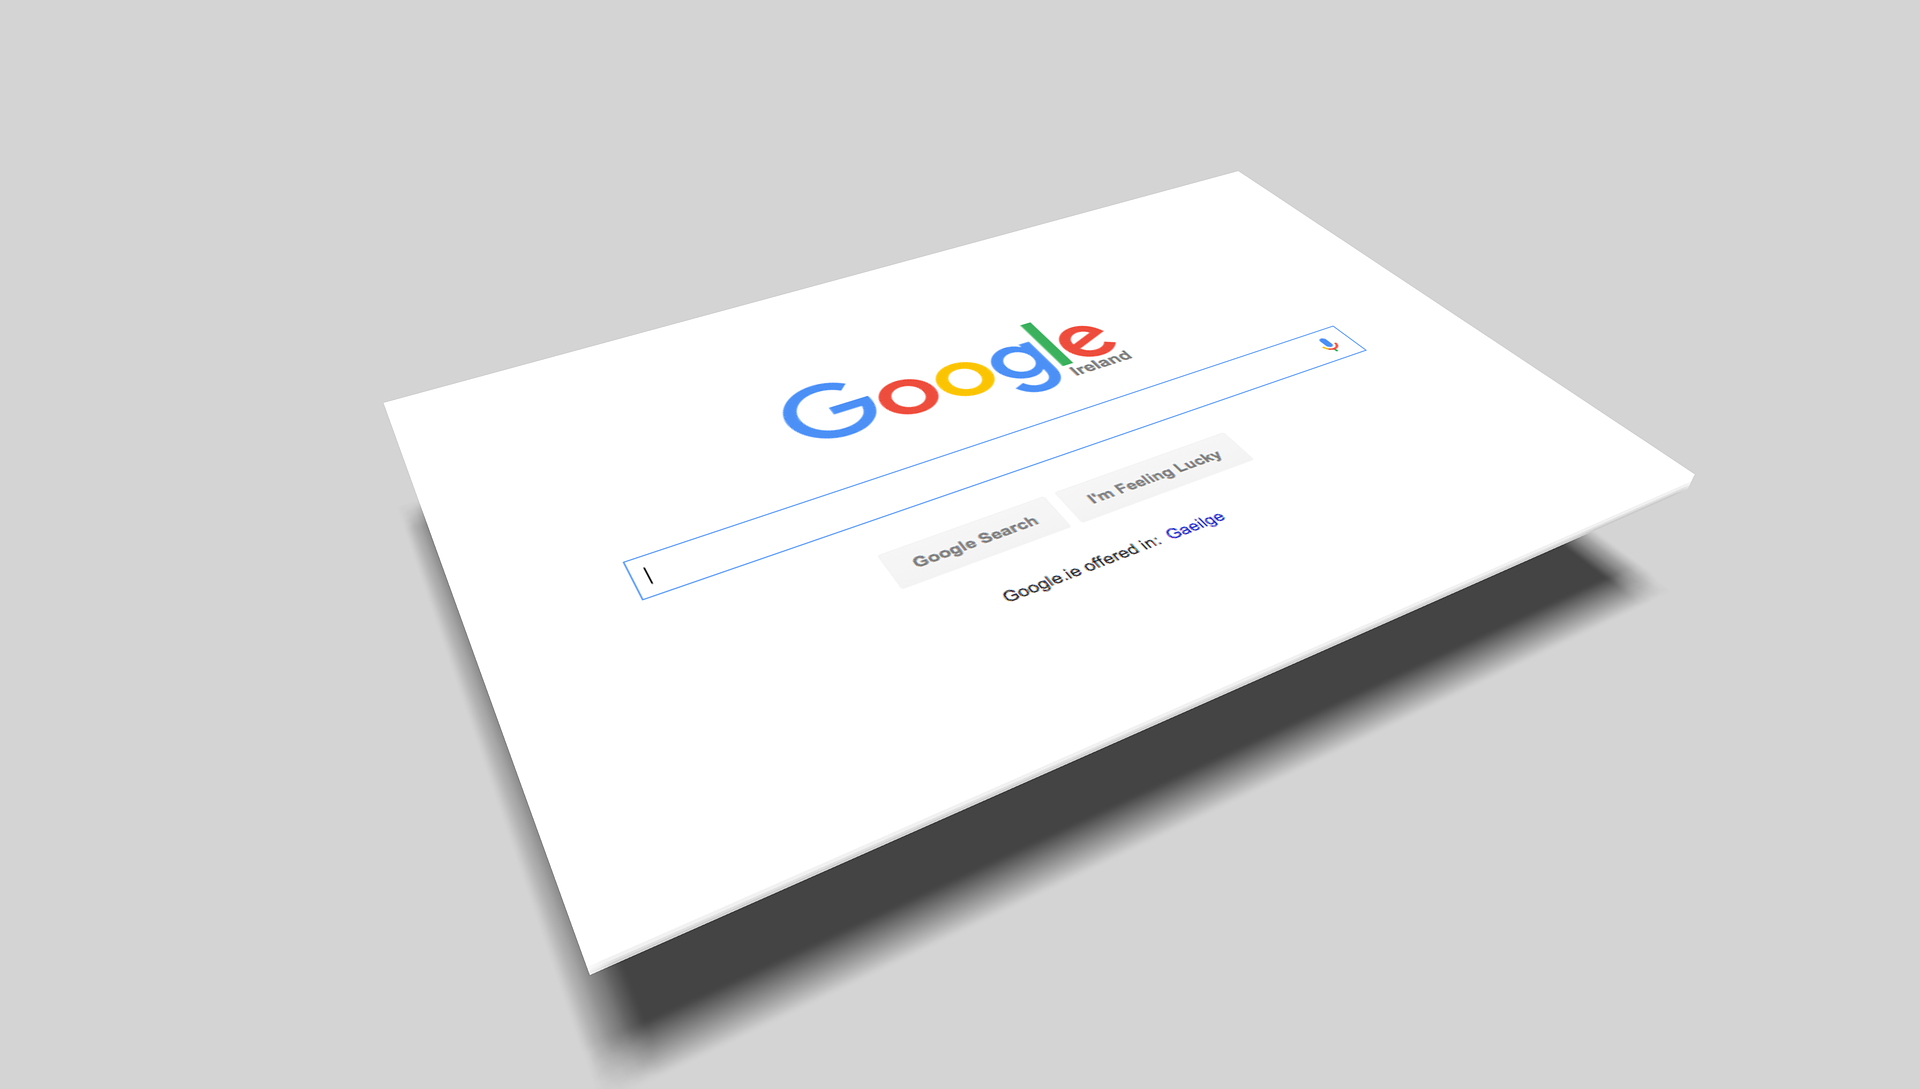 What Google’s Latest SEO Update Is All About